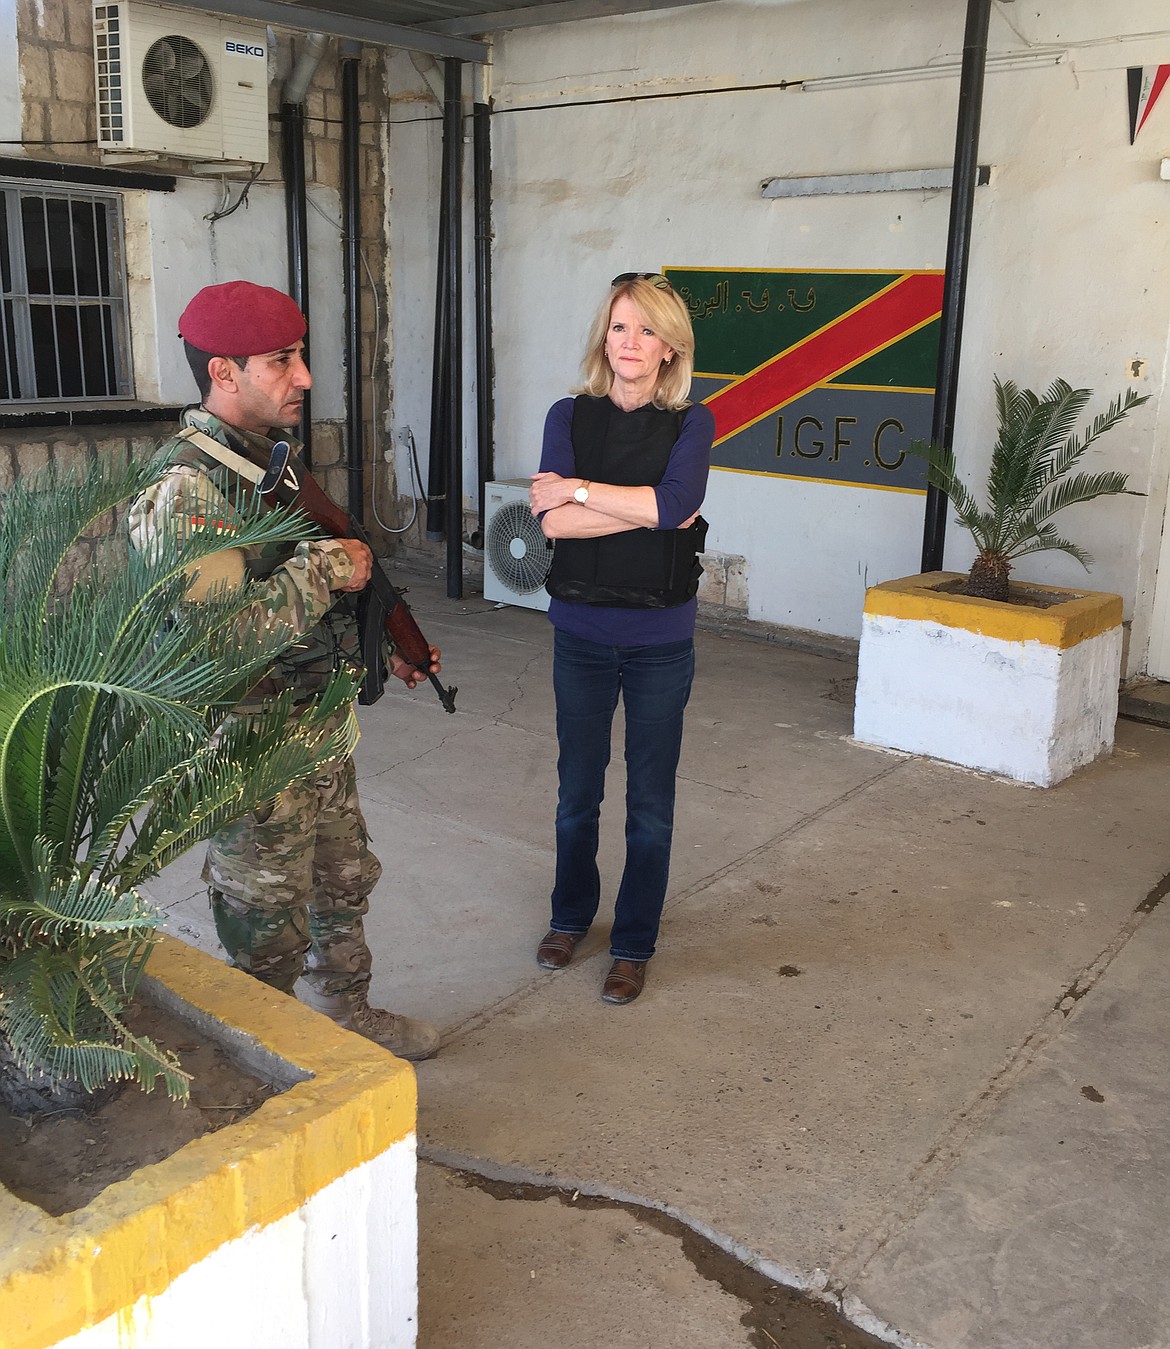 ABC News Chief Global Affairs Correspondent Martha Raddatz speaks with an Iraq soldier in northern Iraq while on assignment in 2016. The decorated journalist will deliver the Idaho Humanities Council's 15th Annual North Idaho Distinguished Humanities Lecture on Thursday, Oct. 11 at 7 p.m. in The Coeur d'Alene Resort. (Courtesy photo)